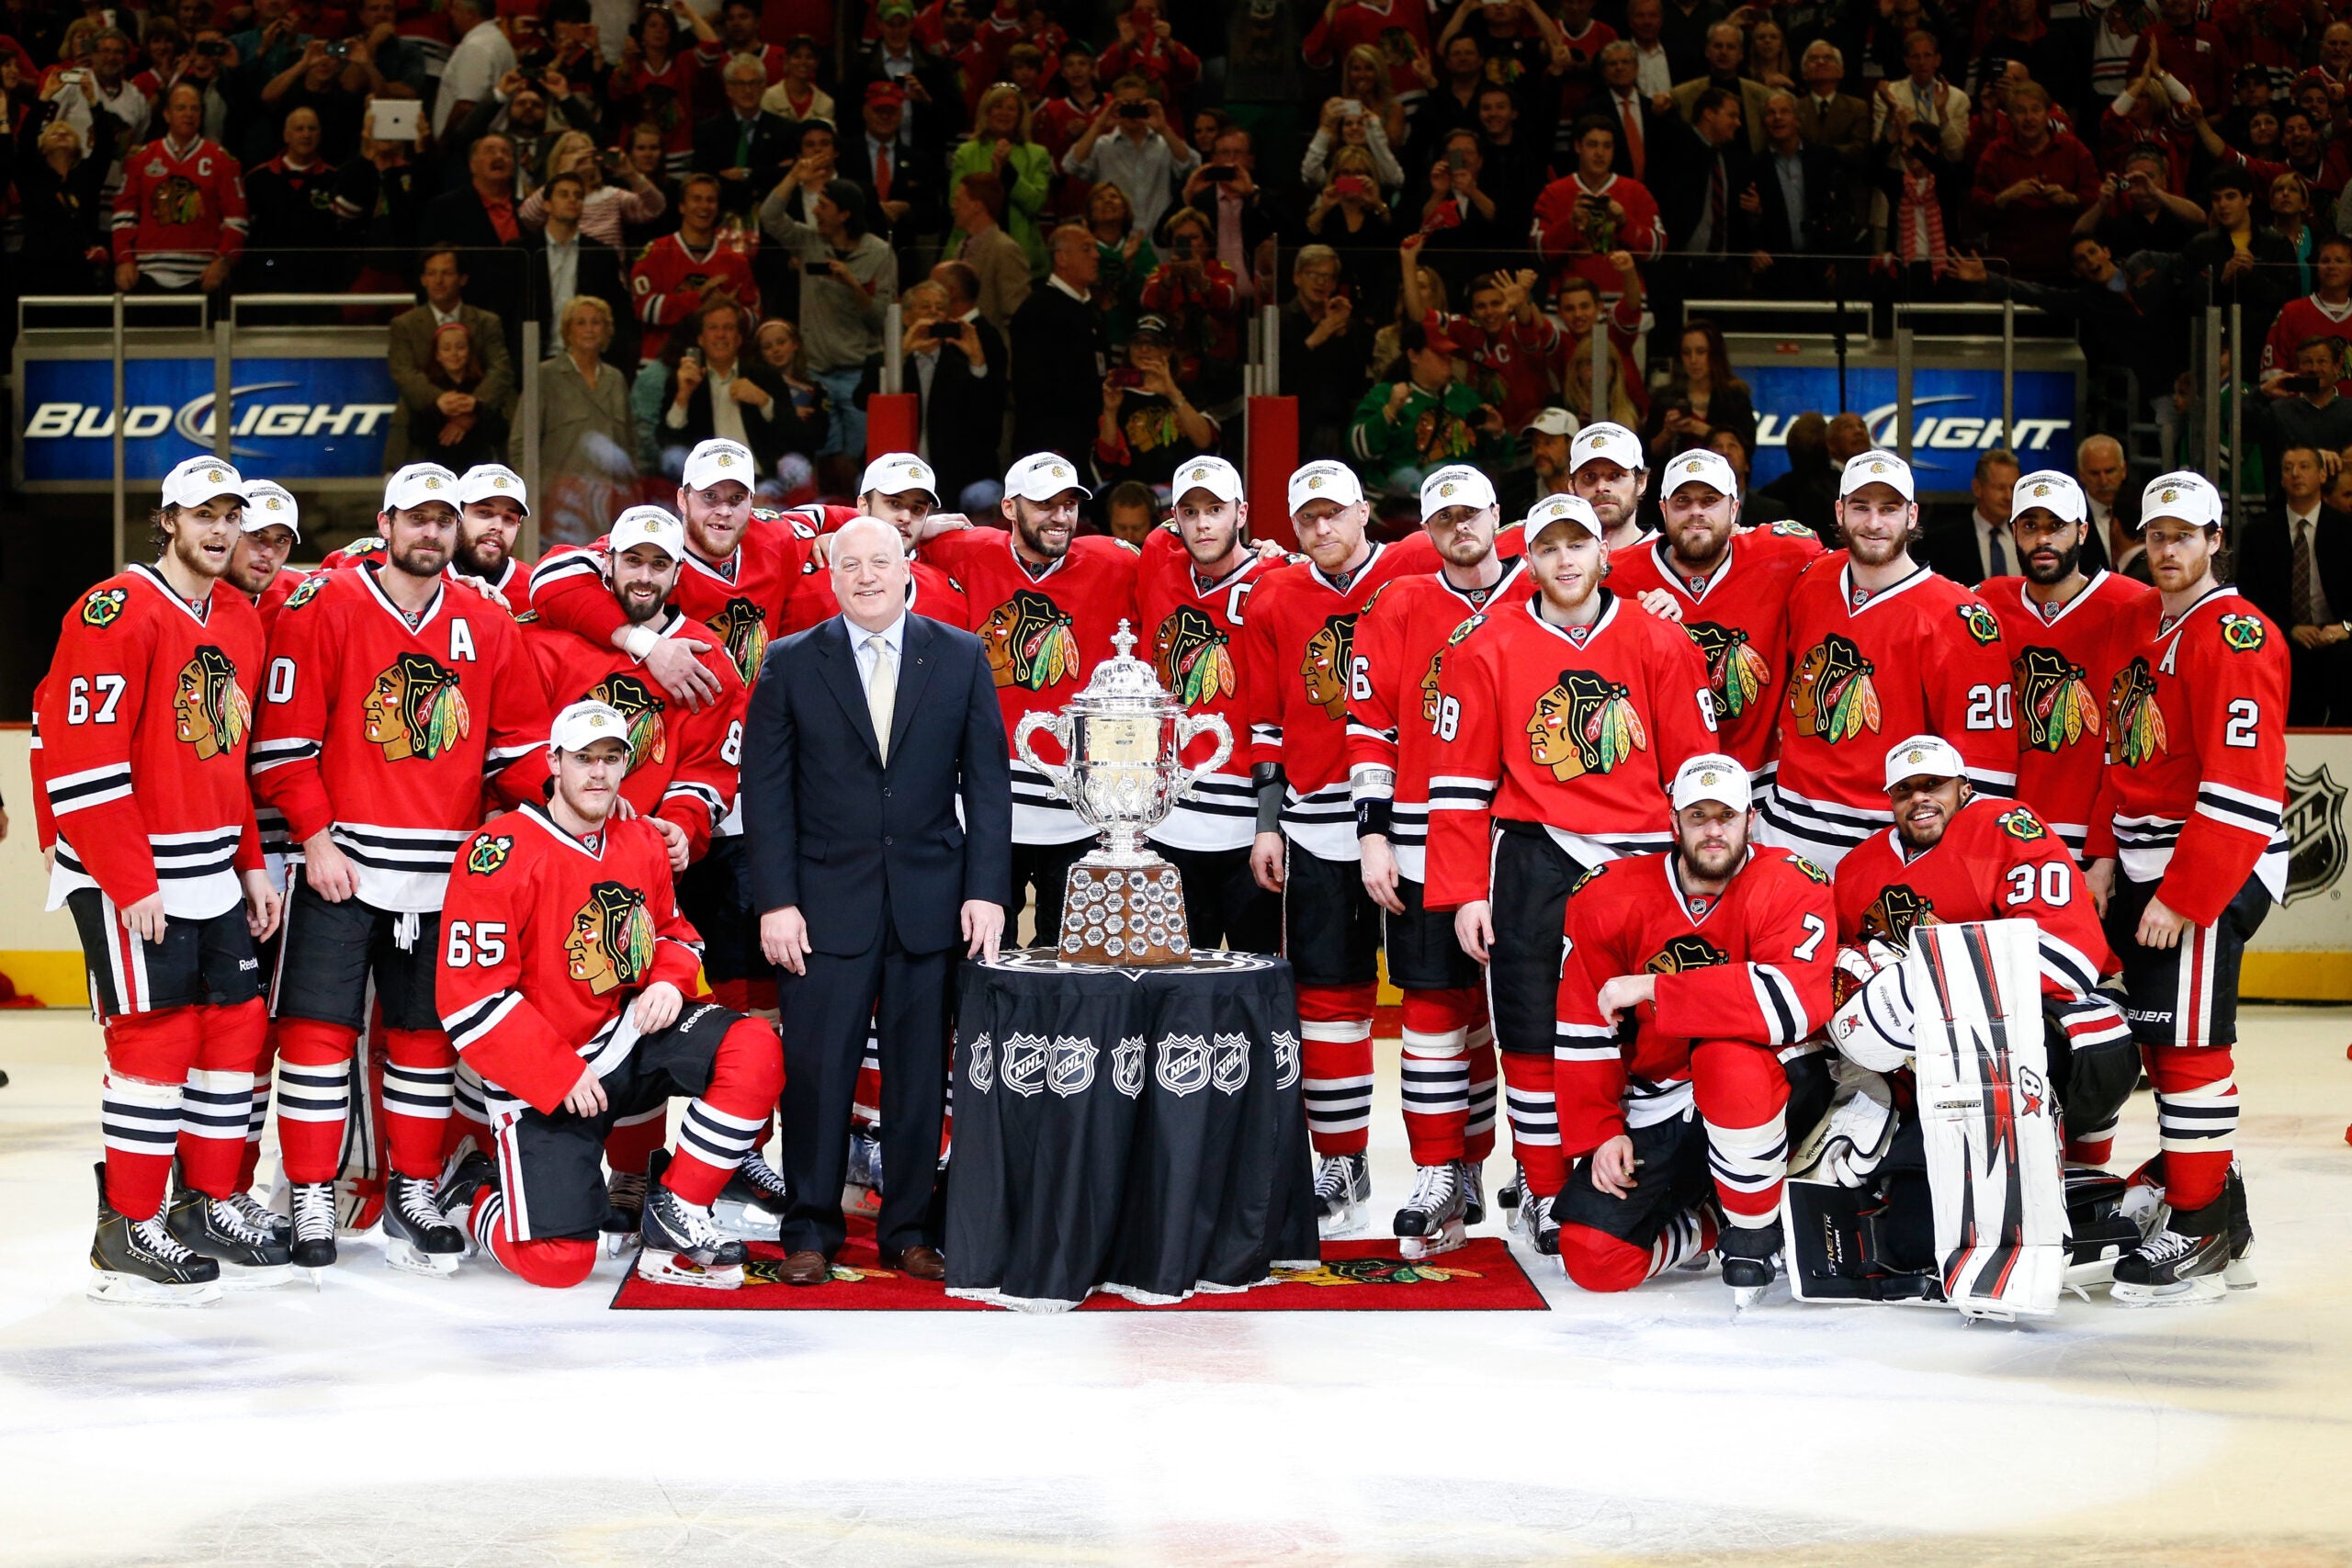 Images: Chicago Blackhawks win the Stanley Cup  Chicago blackhawks  players, Blackhawks players, Chicago blackhawks